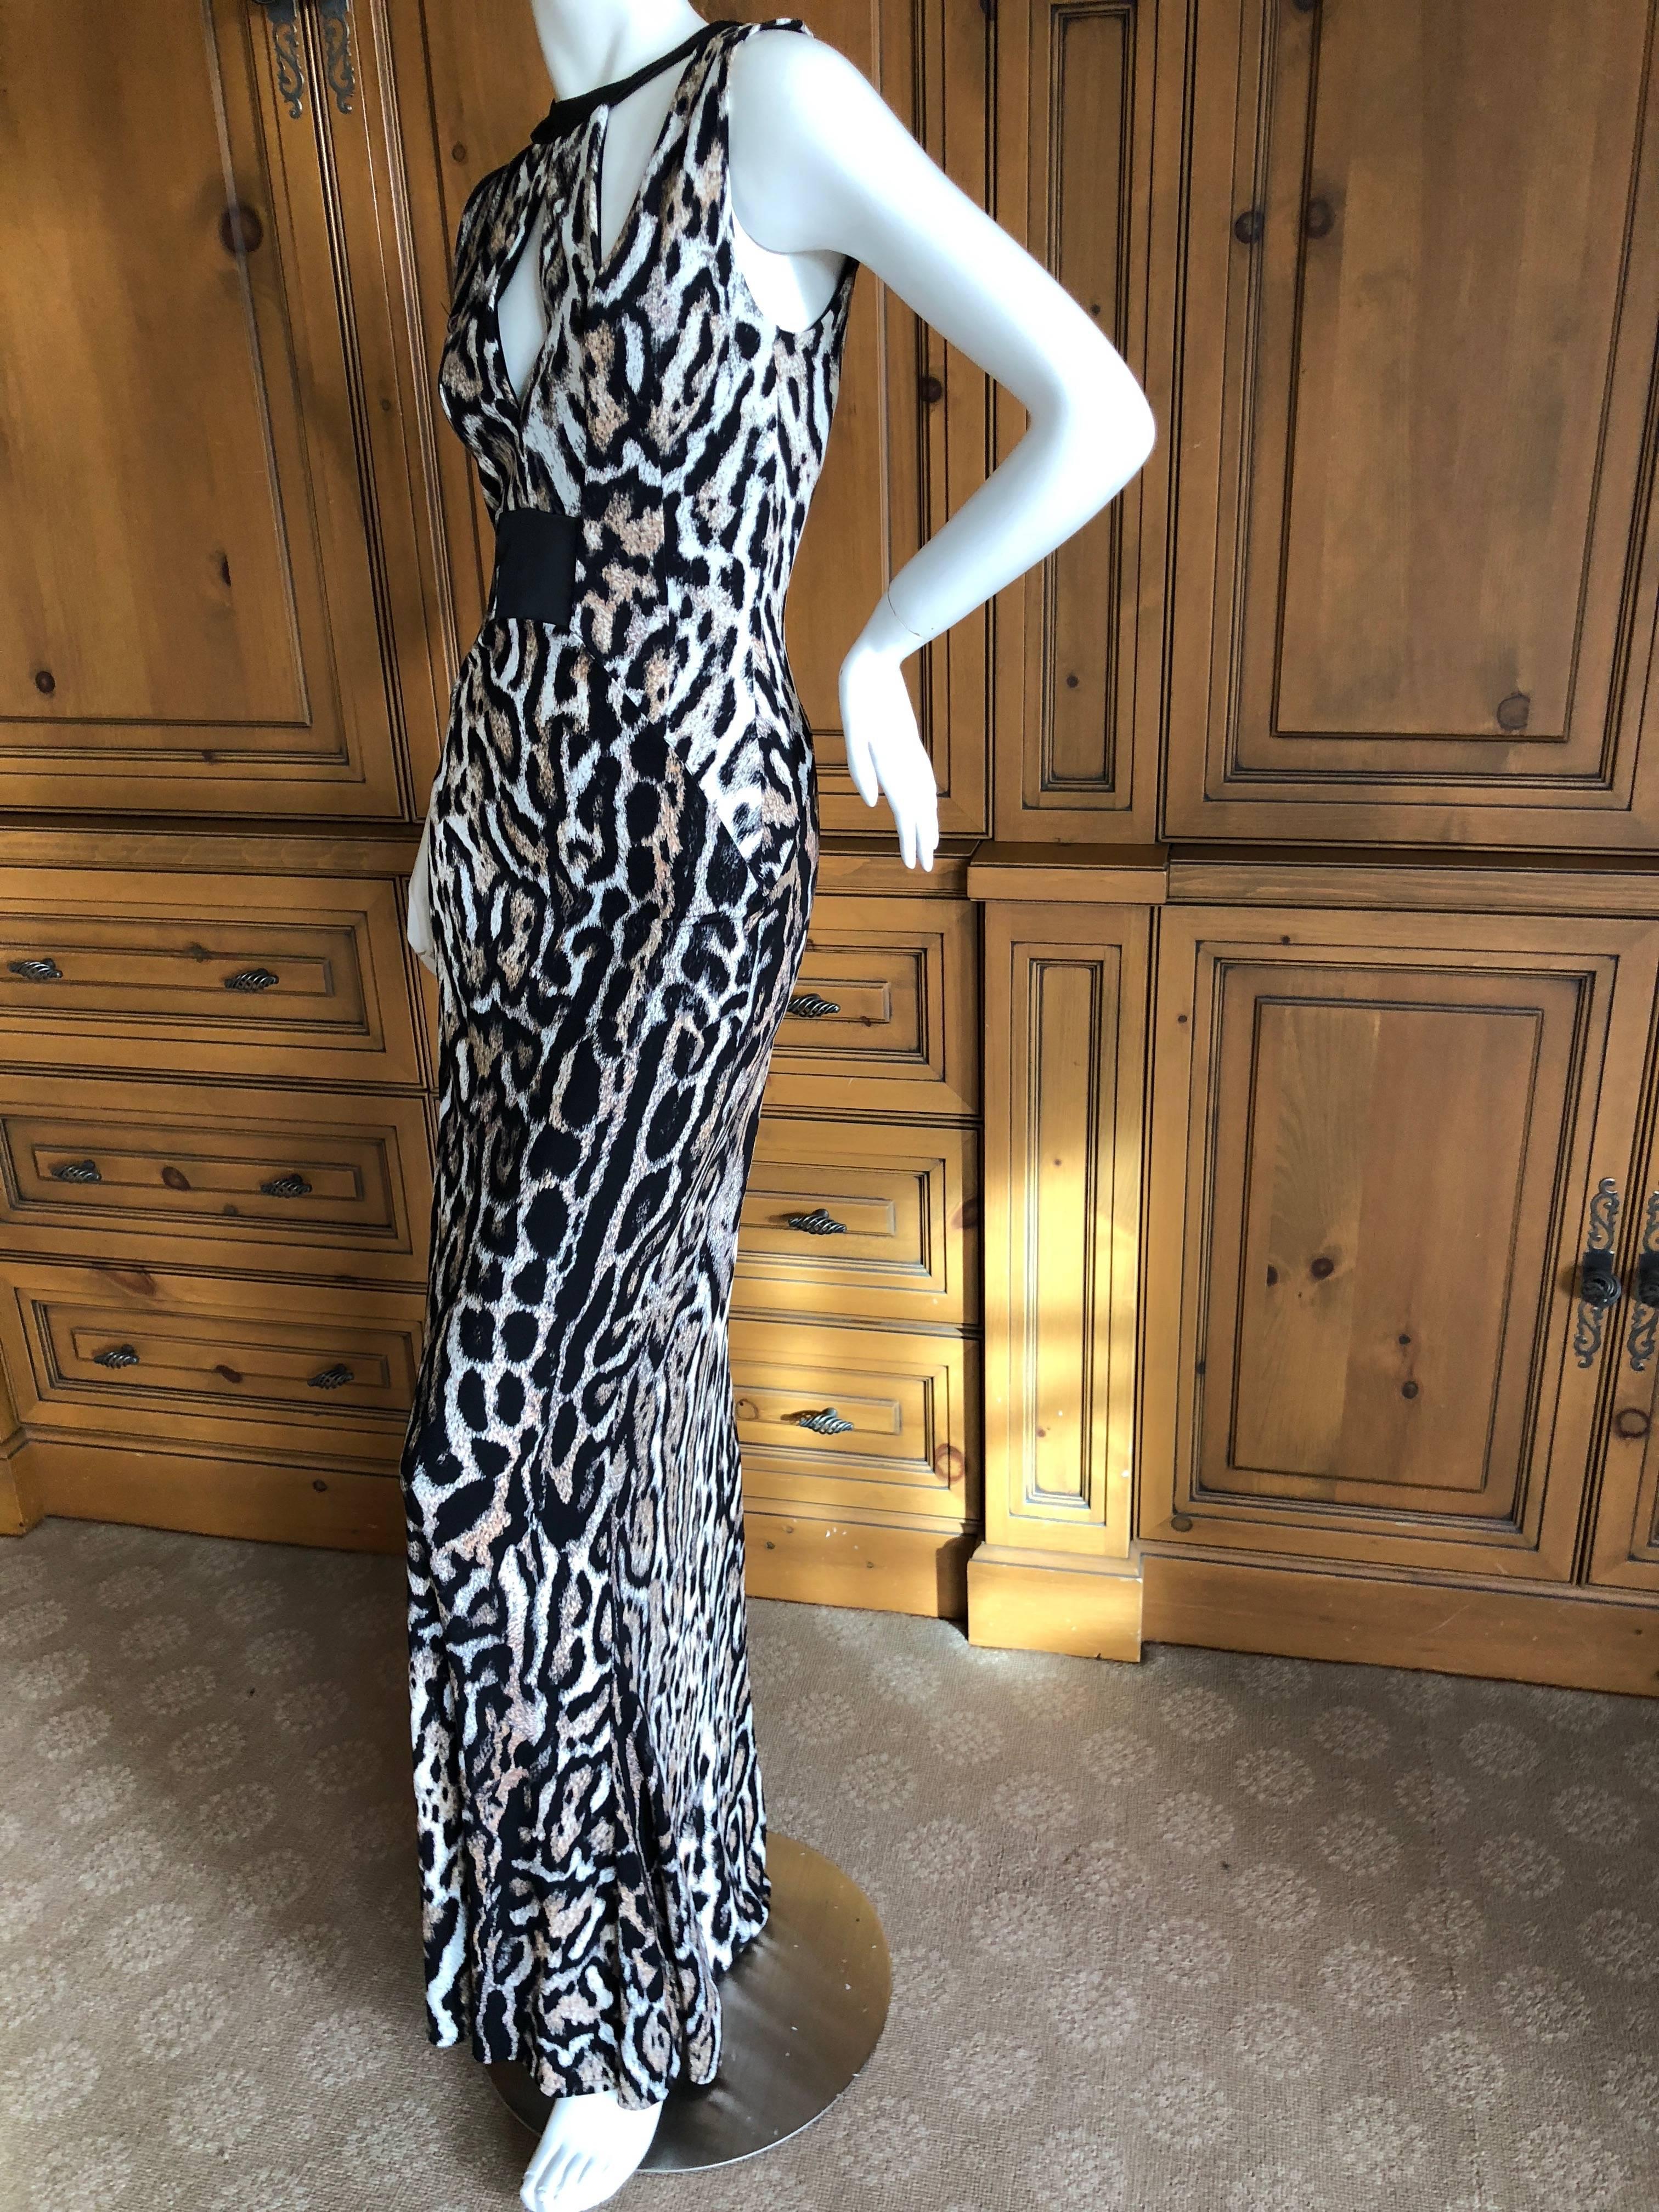 Women's or Men's Roberto Cavalli Long Leopard Dress with Cut Outs for Just Cavalli